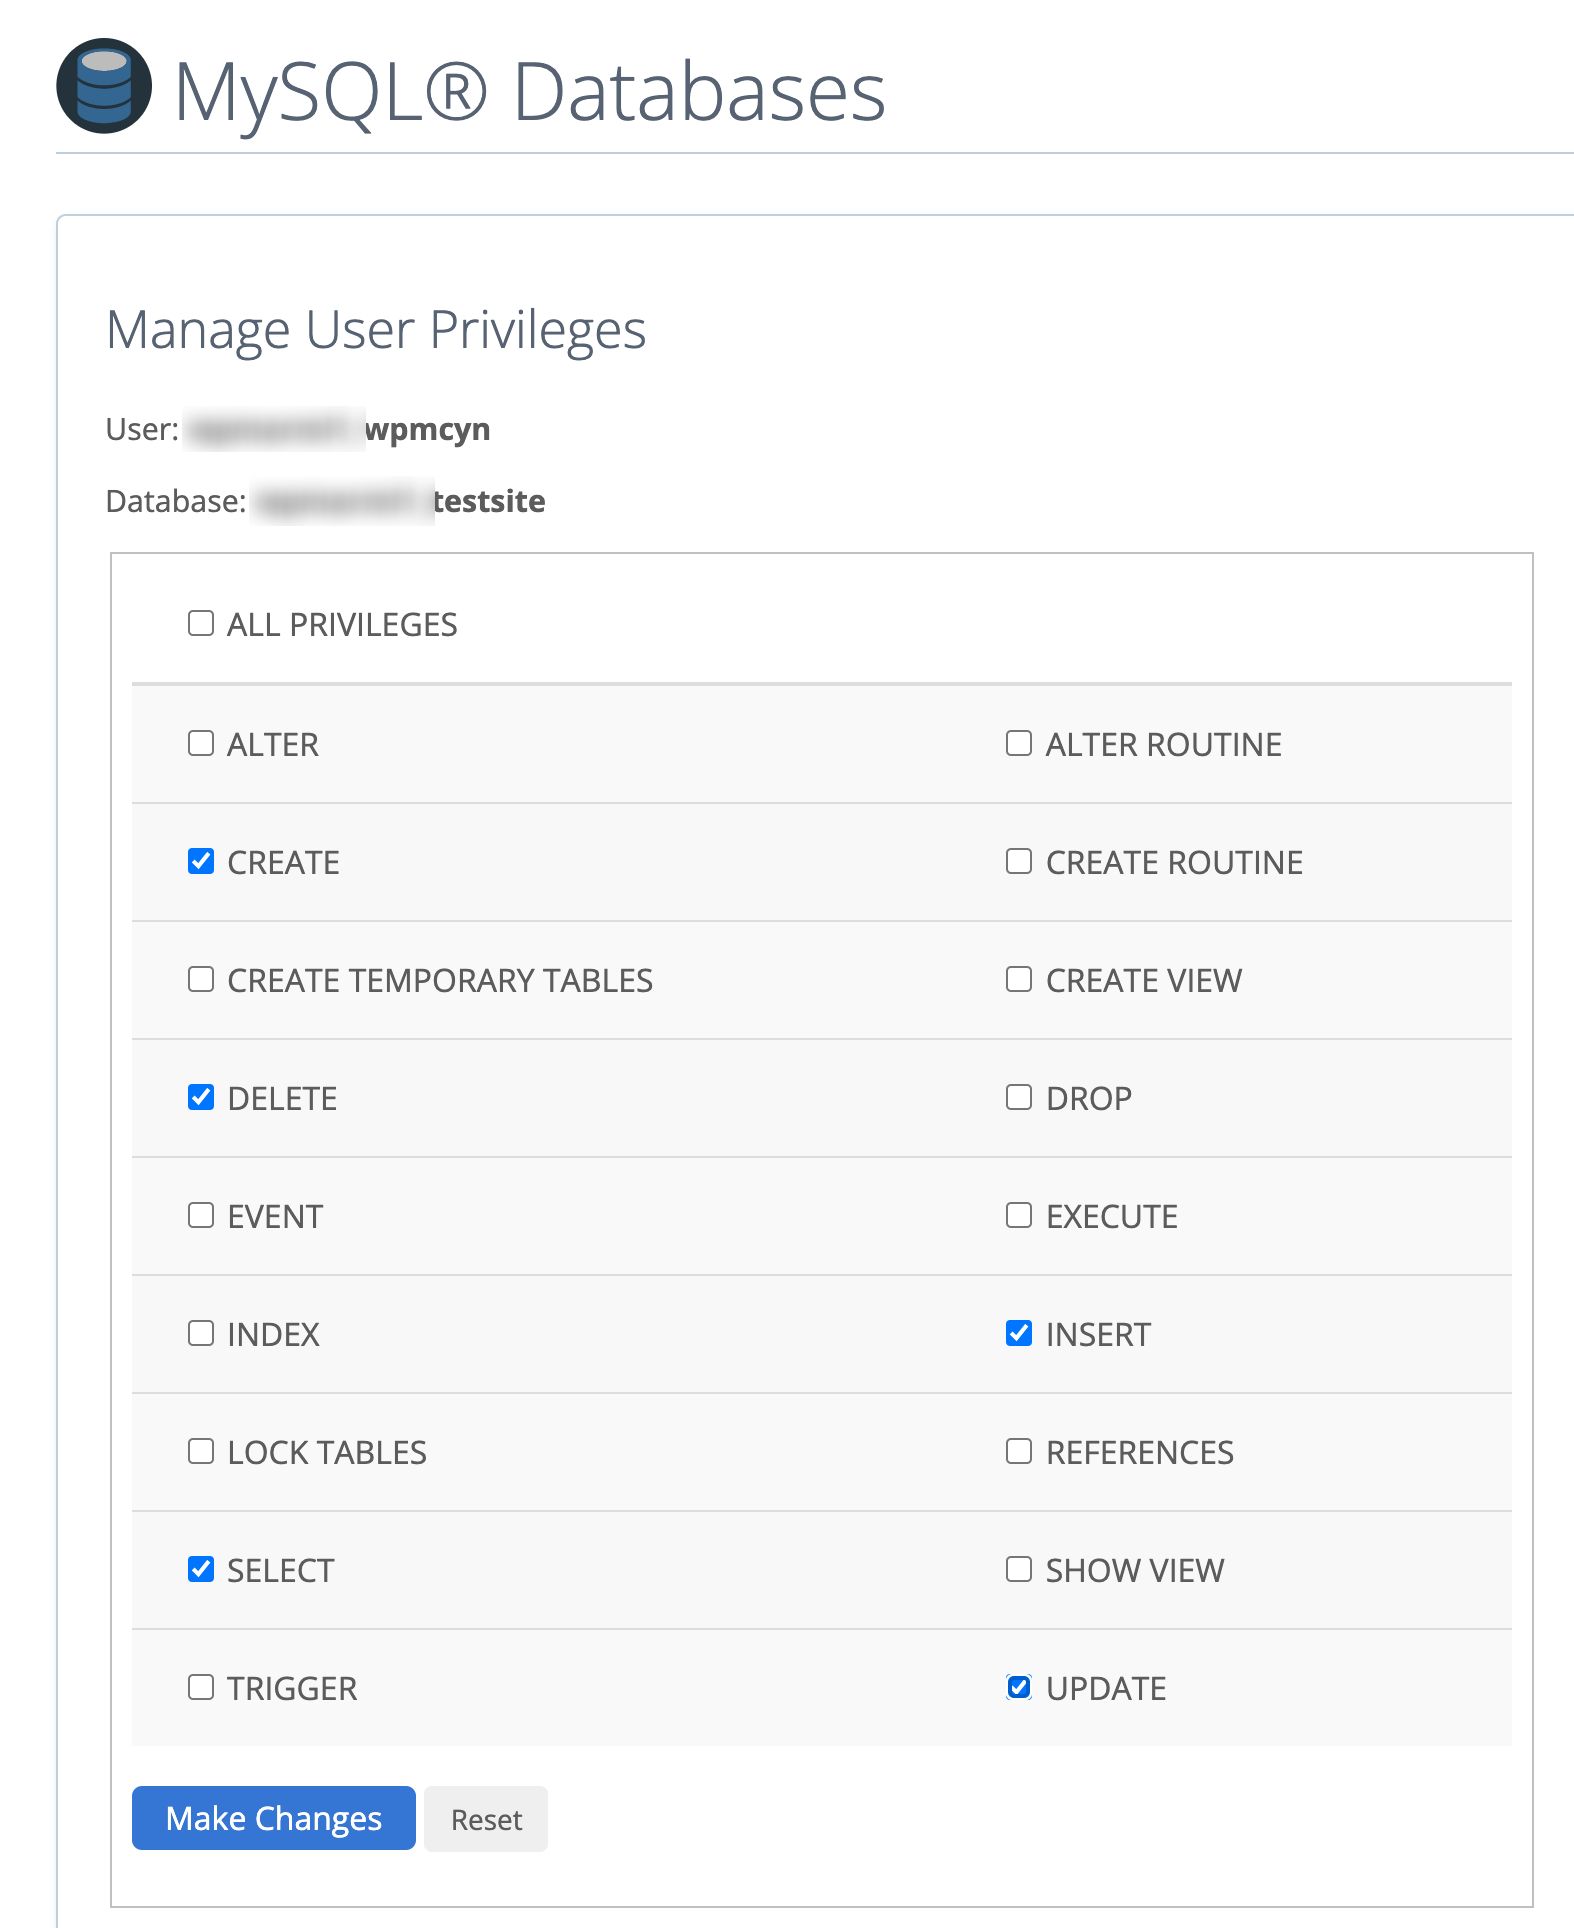 Manage user privileges for the database on the cPanel.